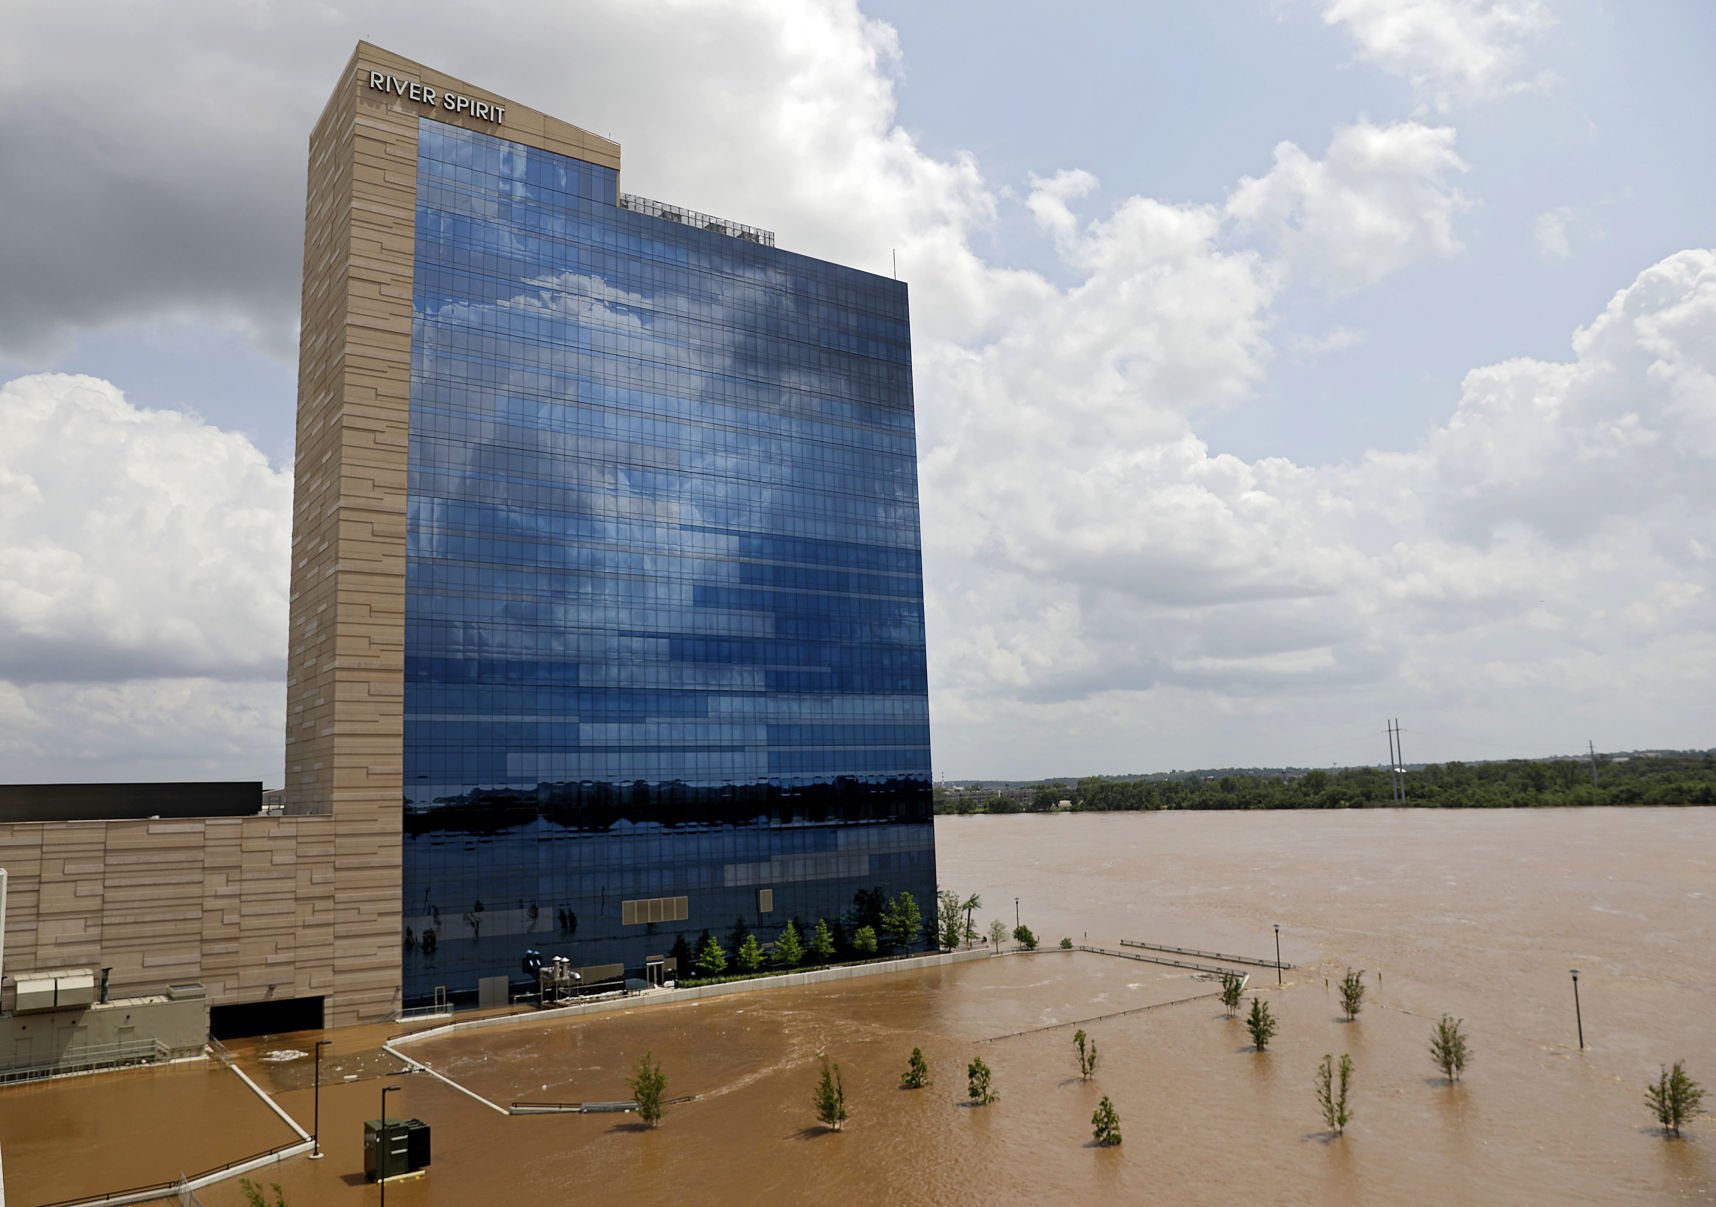 is river city casino open due to flooding